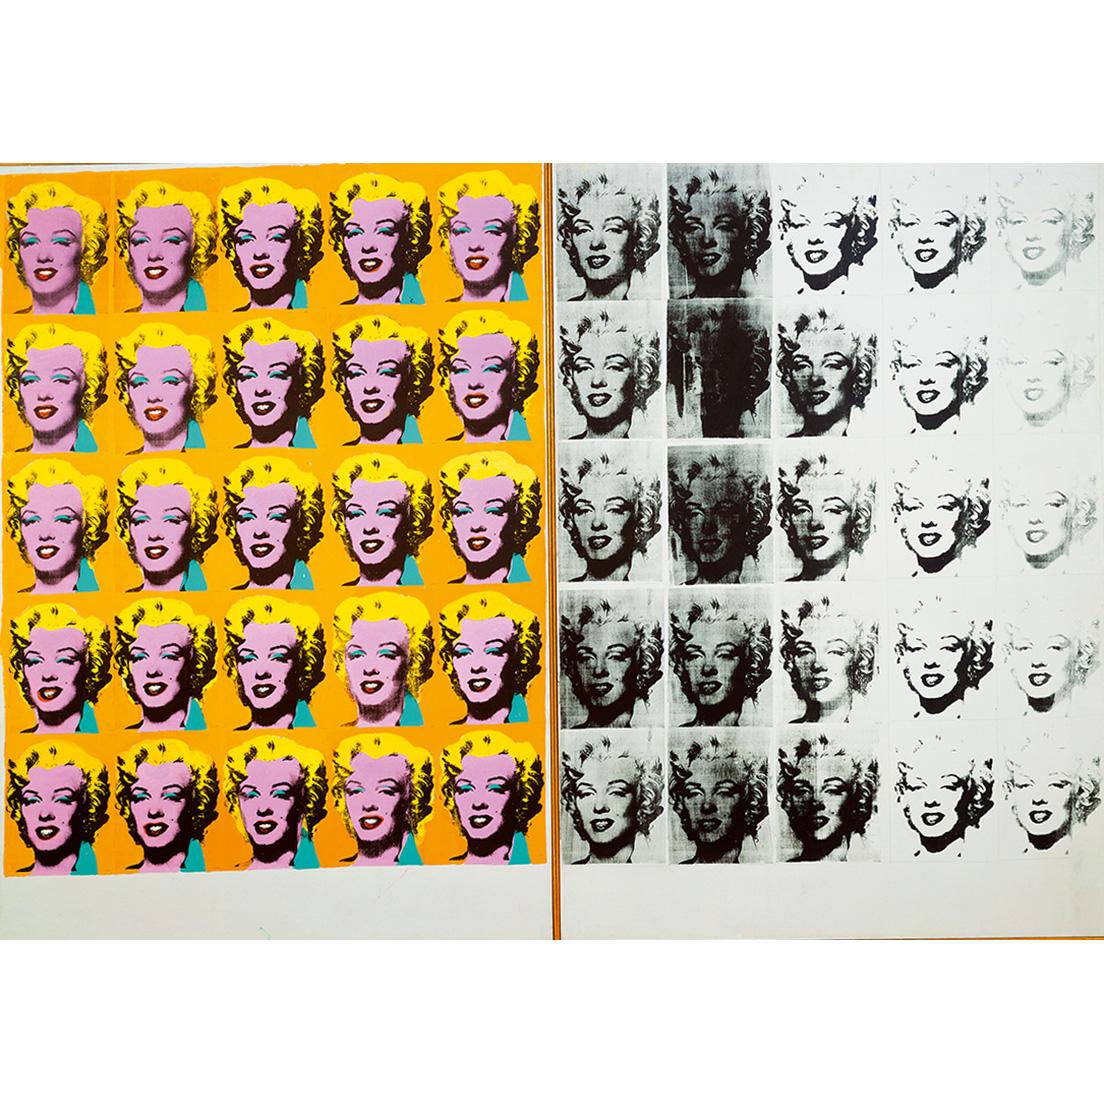 《Marilyn Diptych》（1962年）Tate　© 2020 The Andy Warhol Foundation for the Visual Arts, Inc. / Licensed by DACS, London